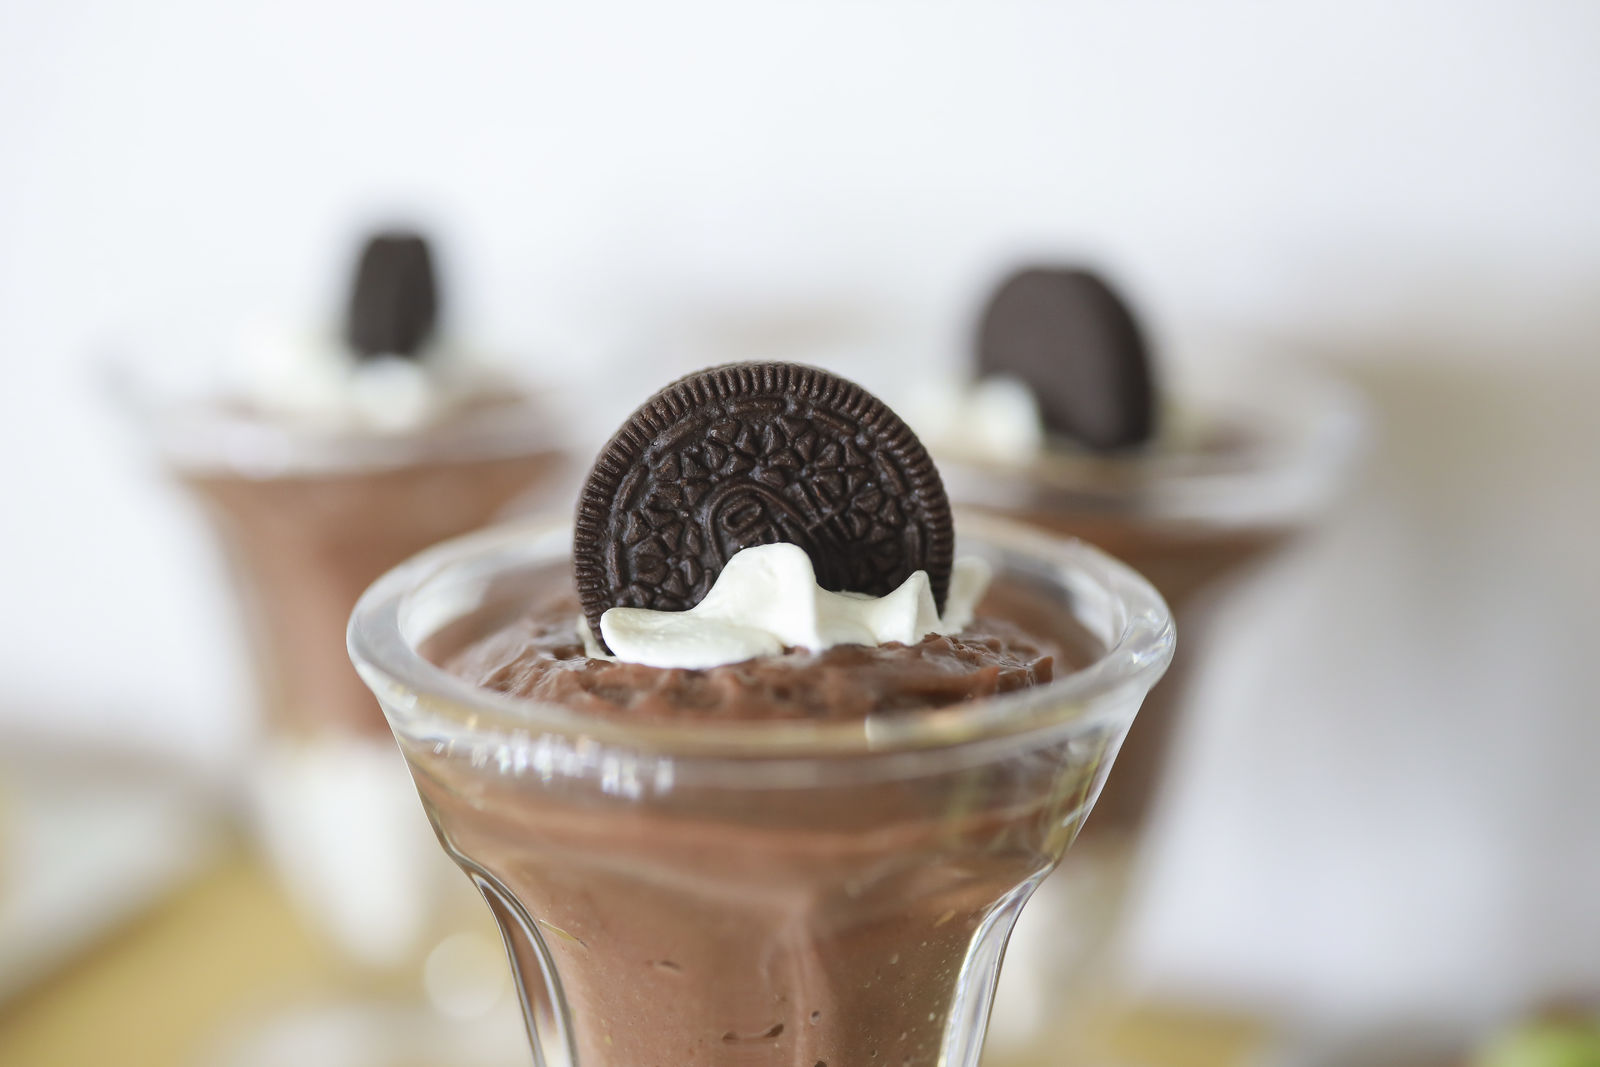 This is a dessert in a glass. Chocolate pudding with cream and a oreo cookie on top.